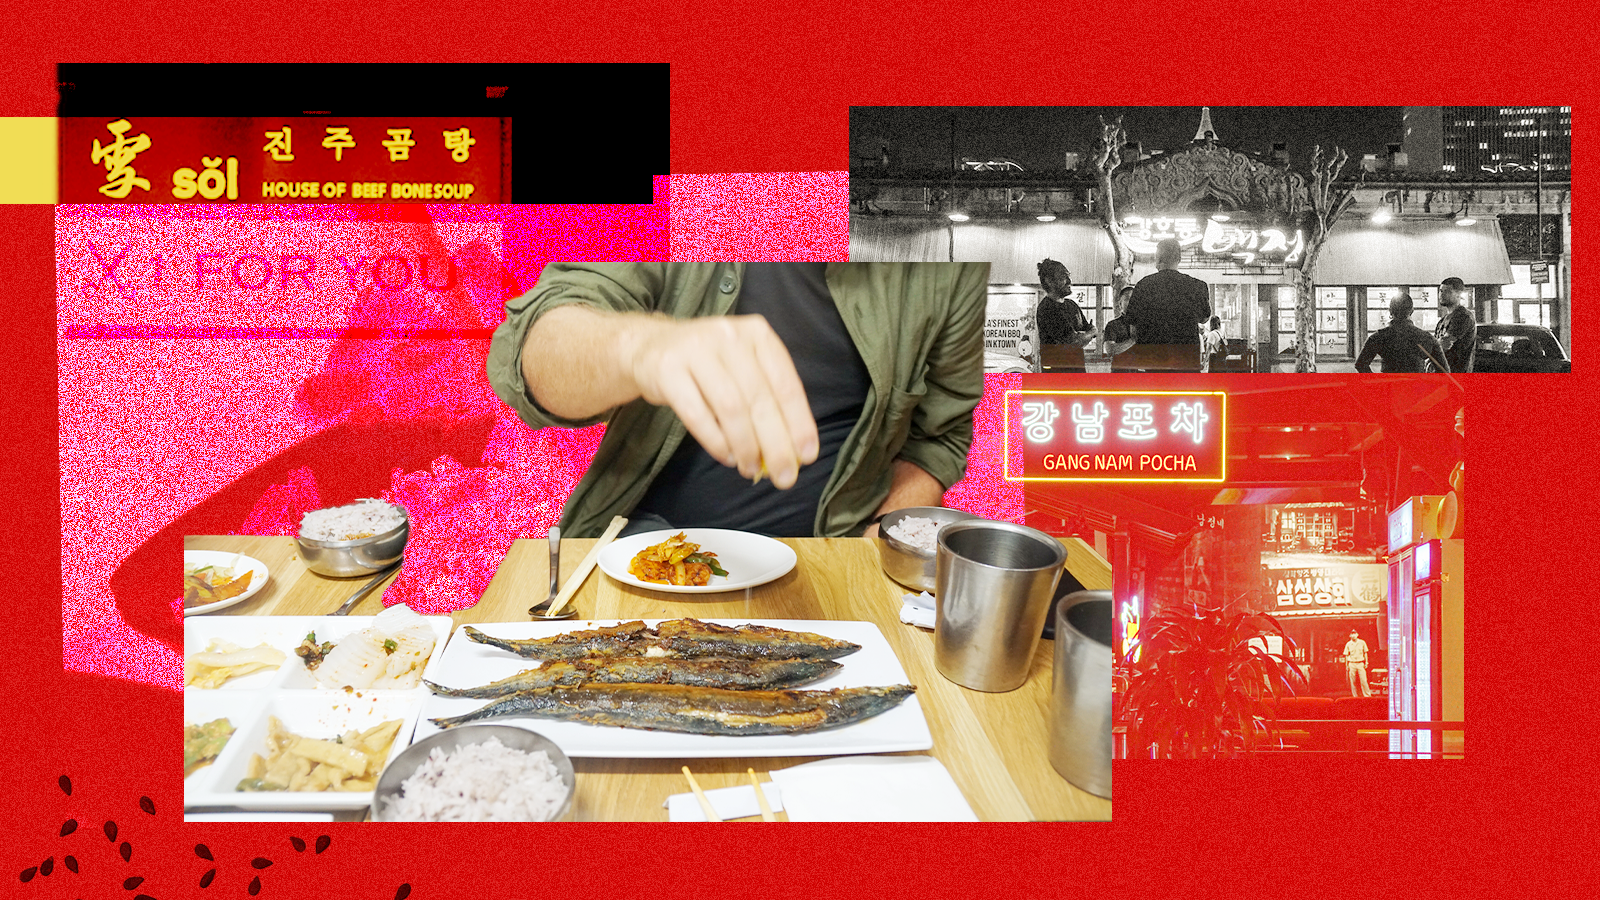 A red-colored collage illustration of dishes and signage from Koreatown, Los Angeles.